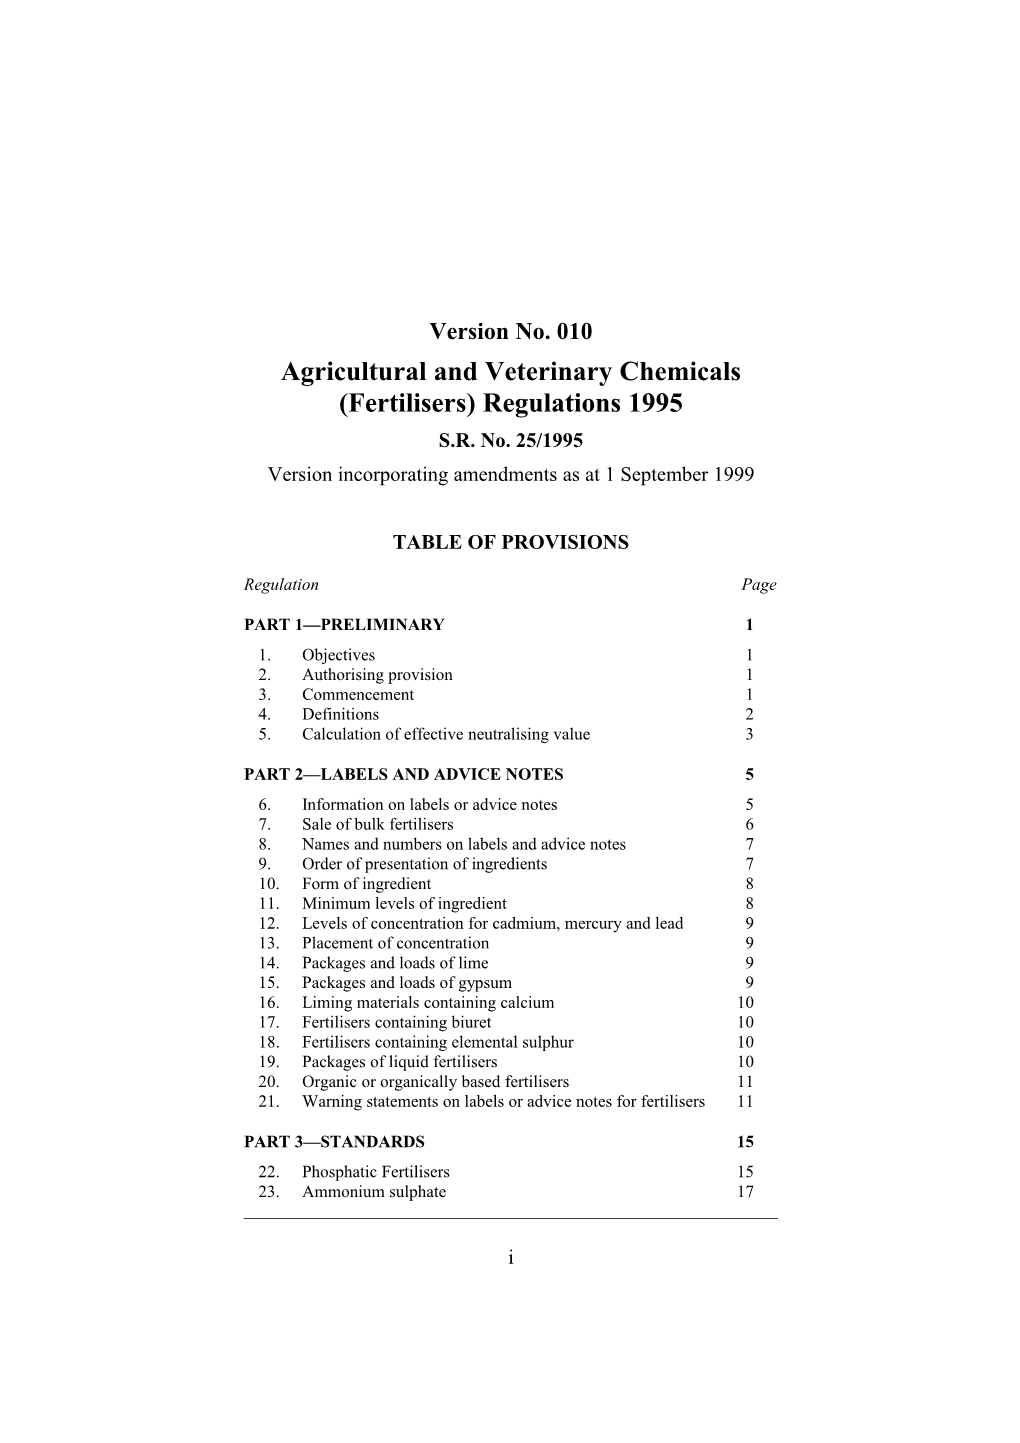 Agricultural and Veterinary Chemicals (Fertilisers) Regulations 1995